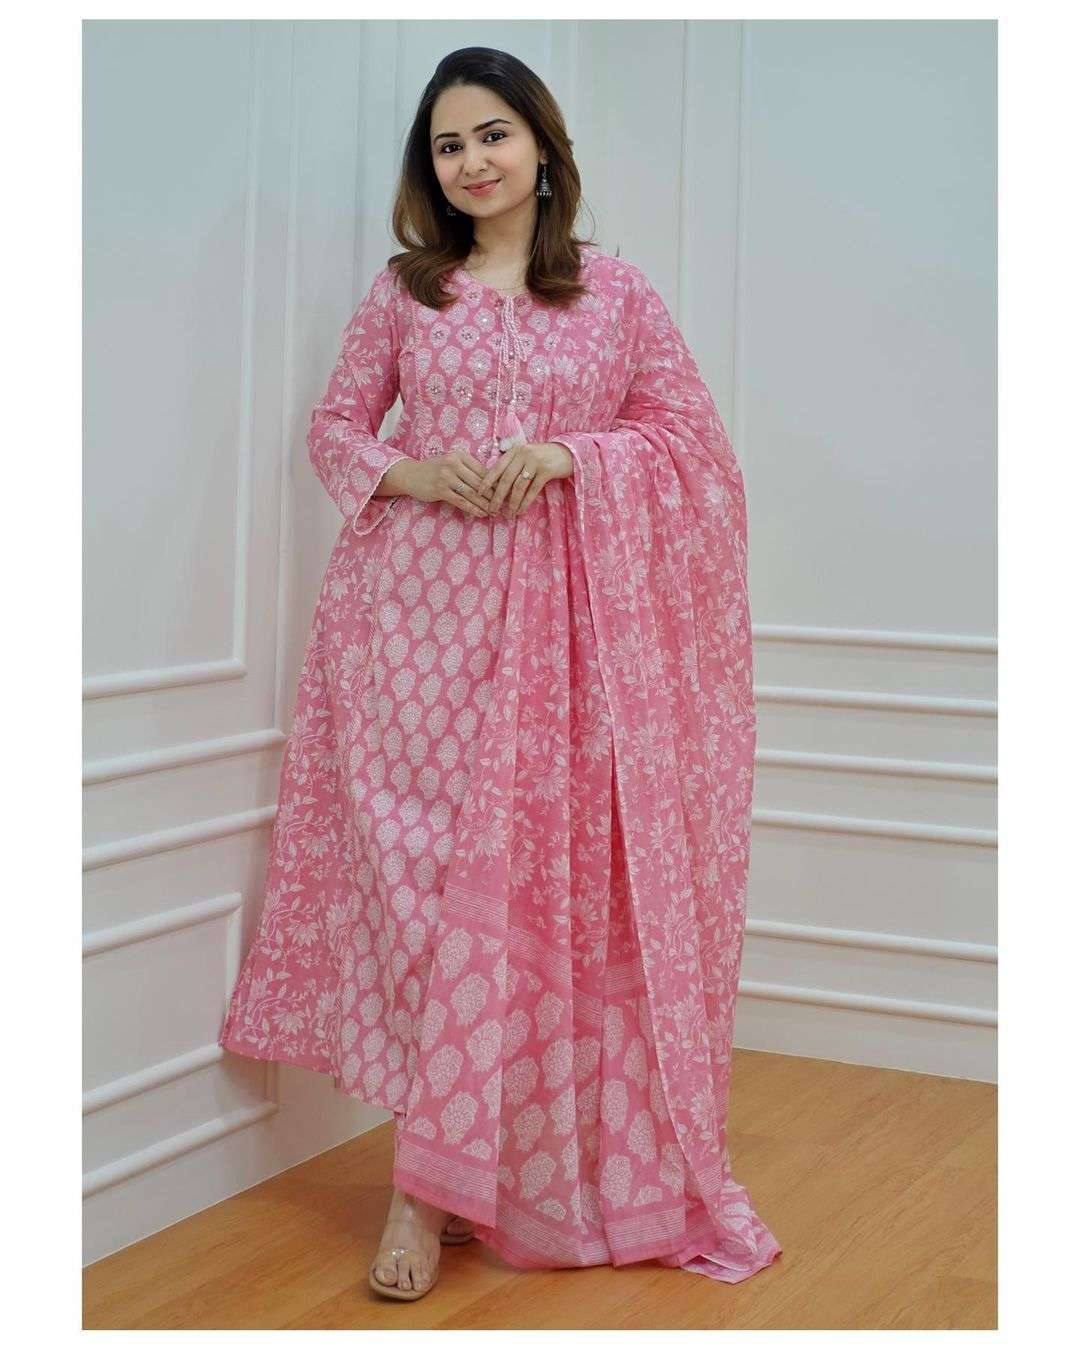 pink floral afghani suit set readymade pure cotton pink colour suit kurtie with pant and duppta frockstyle suit top readymade dress 